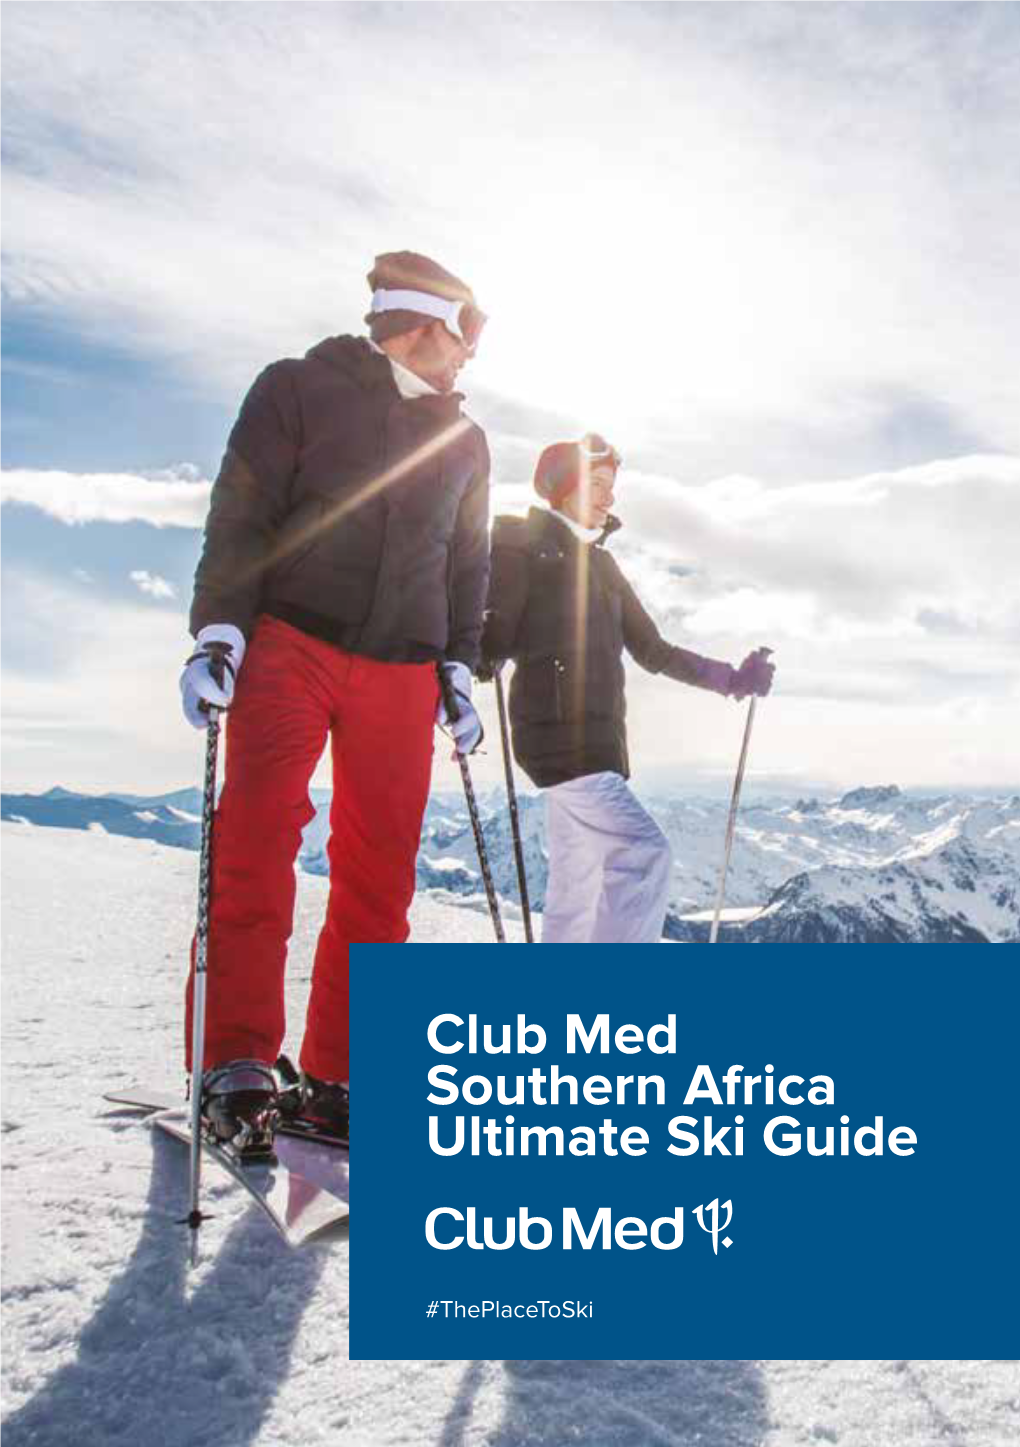 Club Med Southern Africa Ultimate Ski Guide